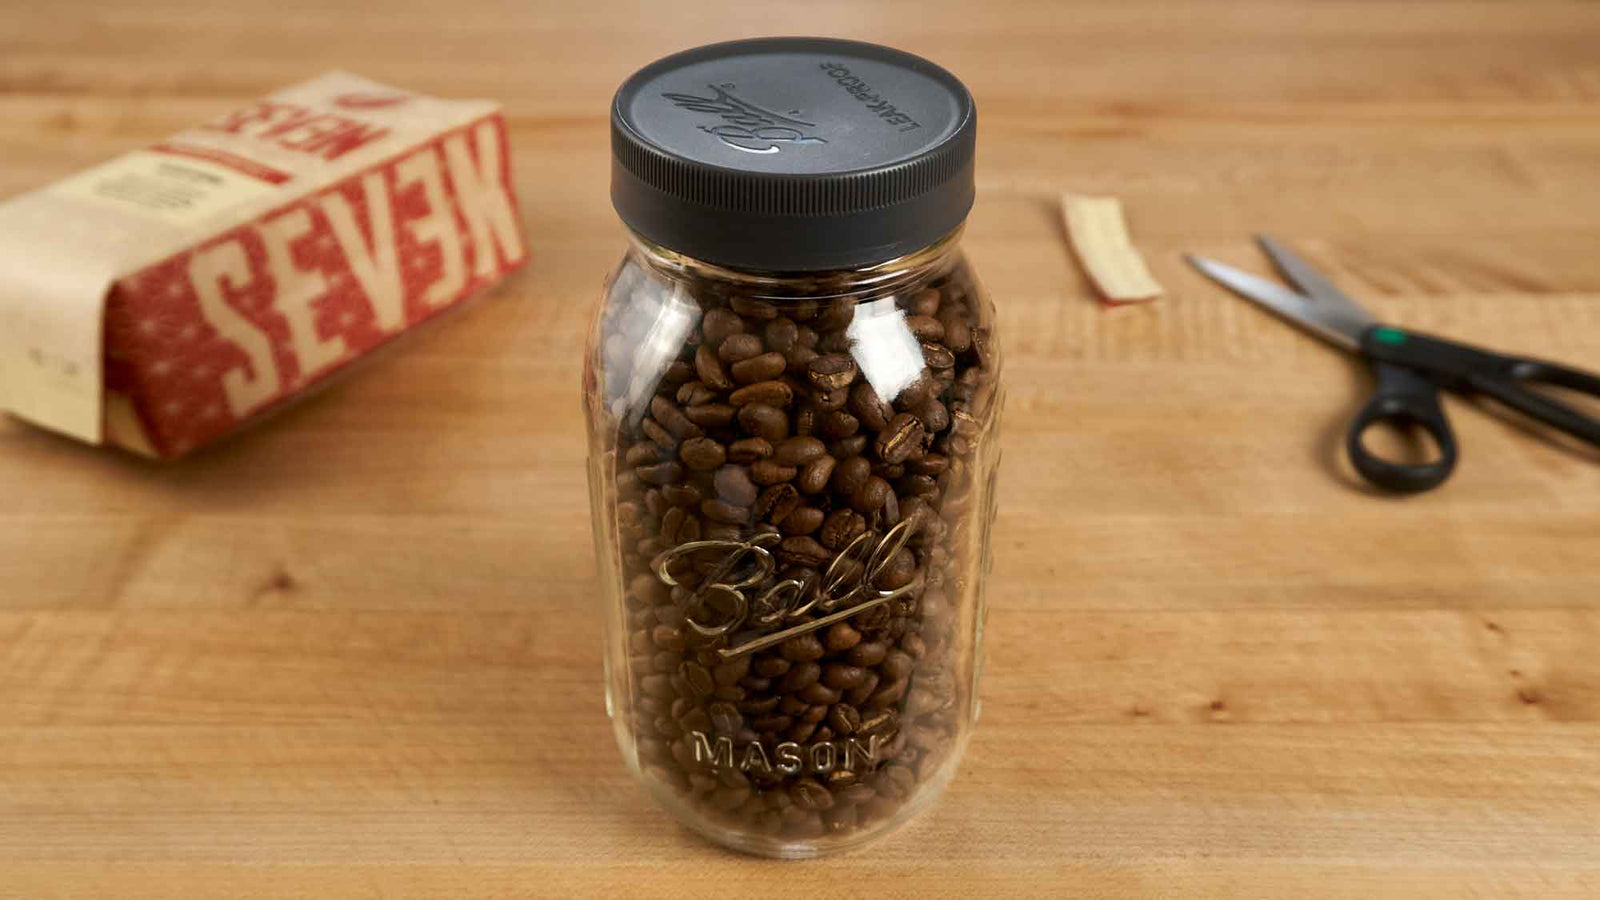 How to Choose the Right Jar Lid, Blog